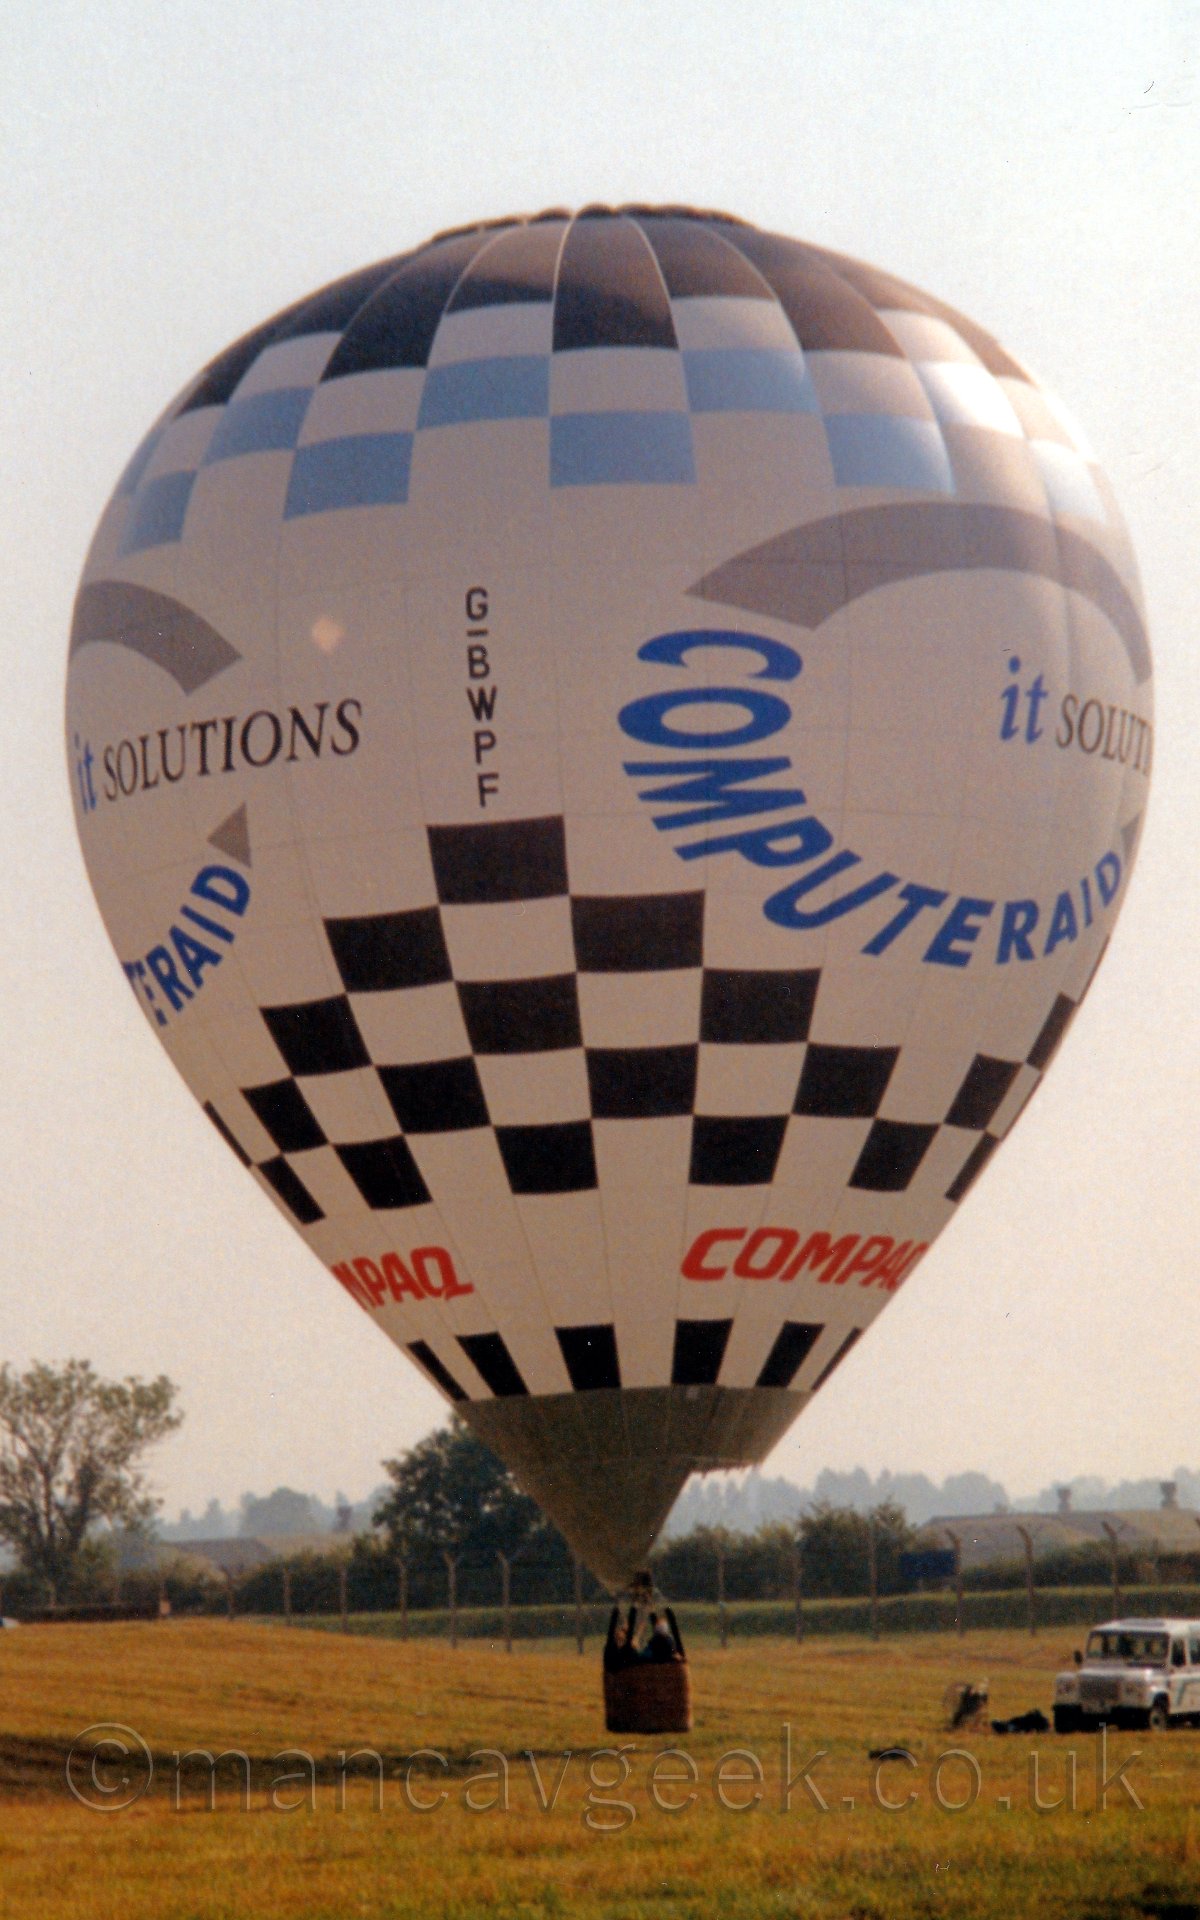 Side view of a hot air balloon taking off from a grassed area, There are 2 people in the wicker basket at the bottom, just a few feet above the ground. The balloons canopy is mostly white, with a black and white checkerboard pattern at both the top and bottom, with additional blue checkerboard panels at the top. There are red "Compaq" titles towards the bottom, and blue "Computeraid" titles forming the lower half of a circle in the centre, the rest of the circle being a grey line., with blue and grey "it solutions" titles in the middle. There is a whiteoff-road vehicle parked off to the right of the frame. In the background, a chainlink fenceruns across the middle of the frame, with trees and bushes behind it, with grey sky completeing the image.